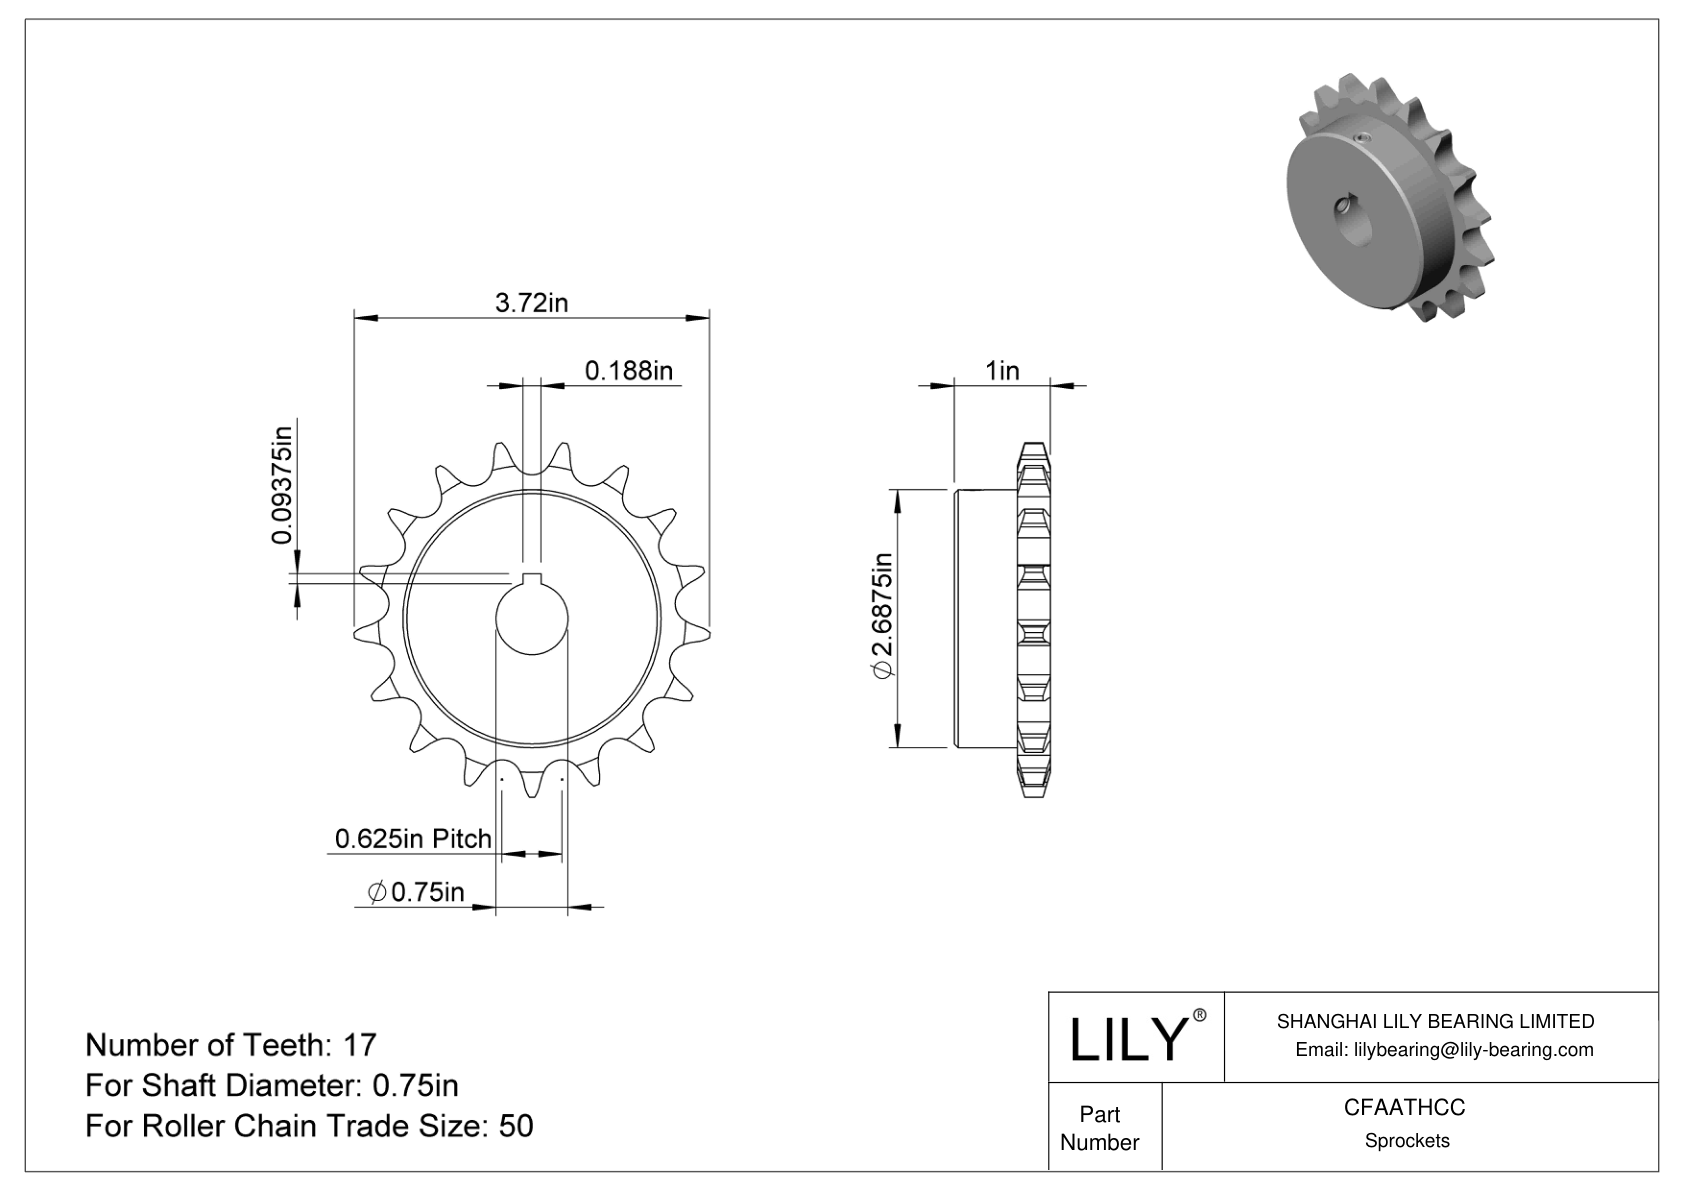 CFAATHCC Wear-Resistant Sprockets for ANSI Roller Chain cad drawing